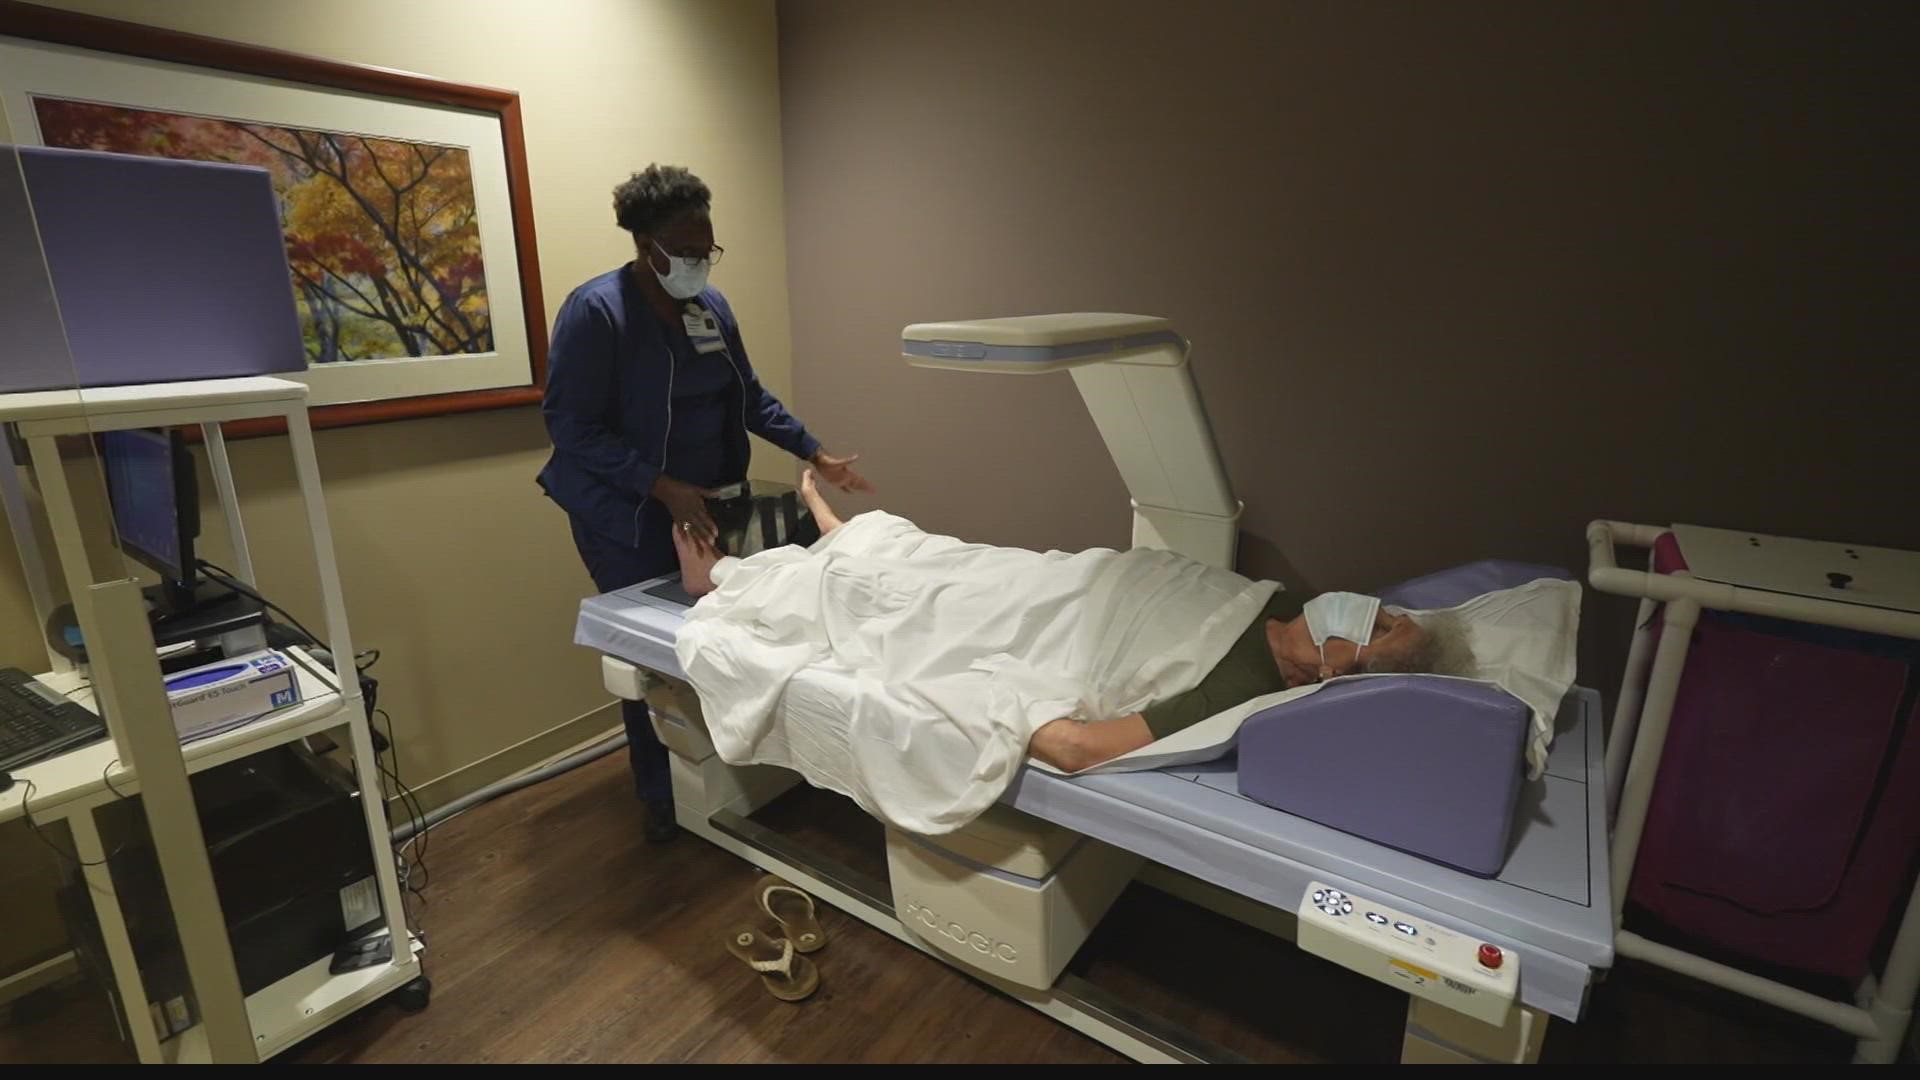 Ascension St. Vincent orthopedic surgeon Dr. Renn Crichlow said often patients are unaware of their deteriorating bone health and what puts them at risk.